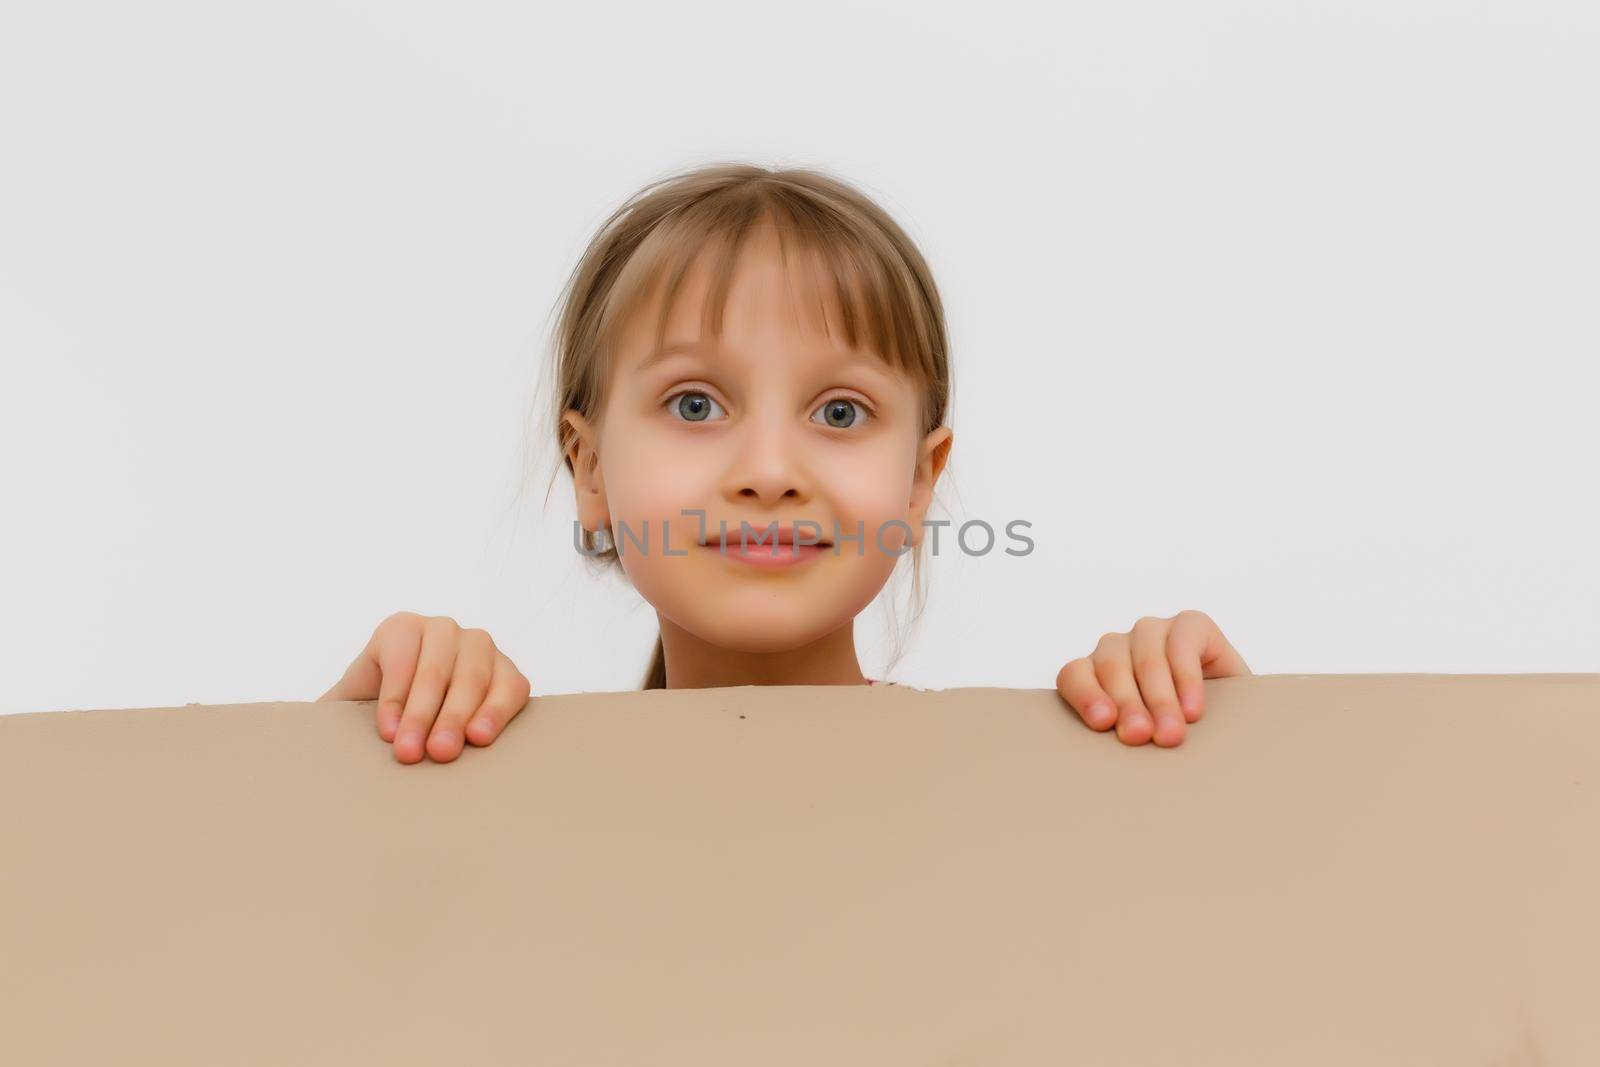 Cute little girl standing in large cardboard box, wanting to play hide-and-seek by Andelov13